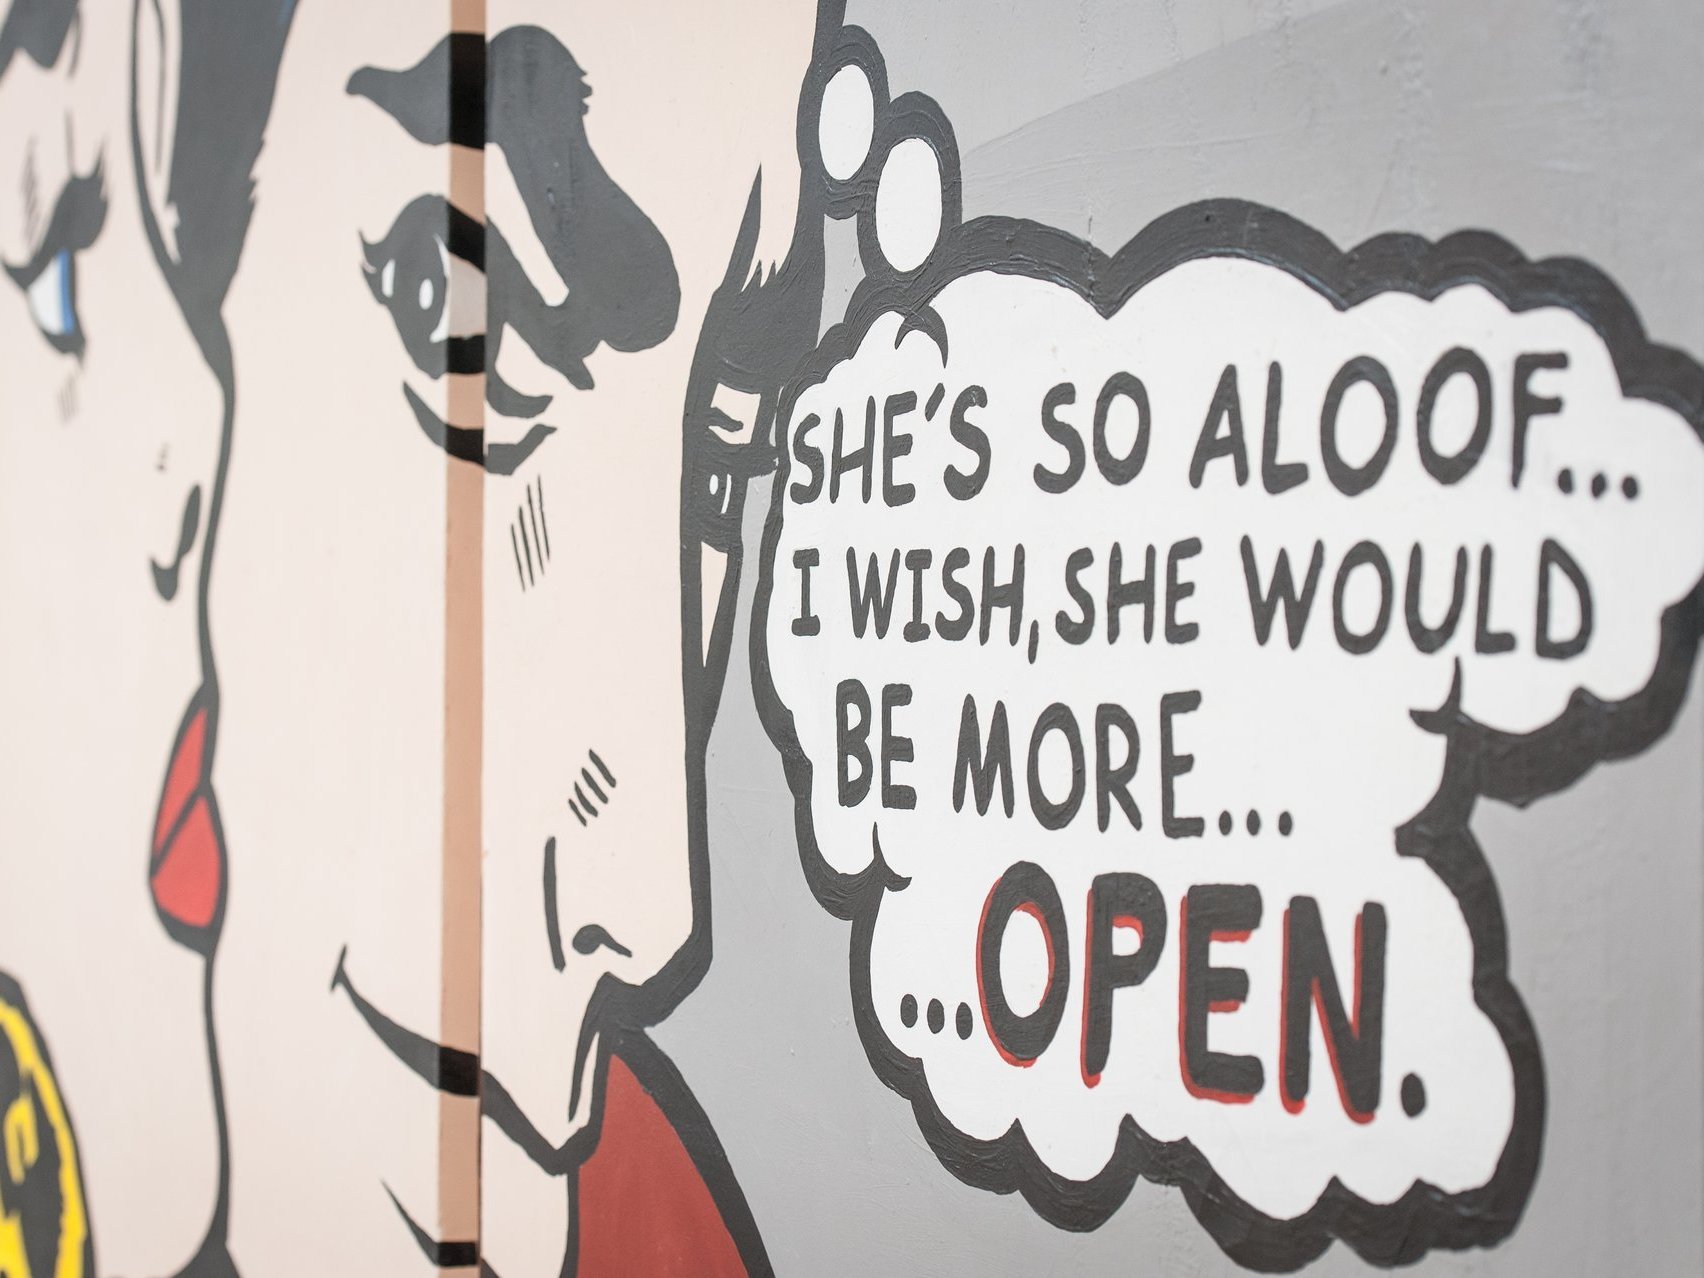 Popart mit Sprechblase: "SHE'S SO ALOOF... I WISH, SHE WOULD BE MORE... OPEN.